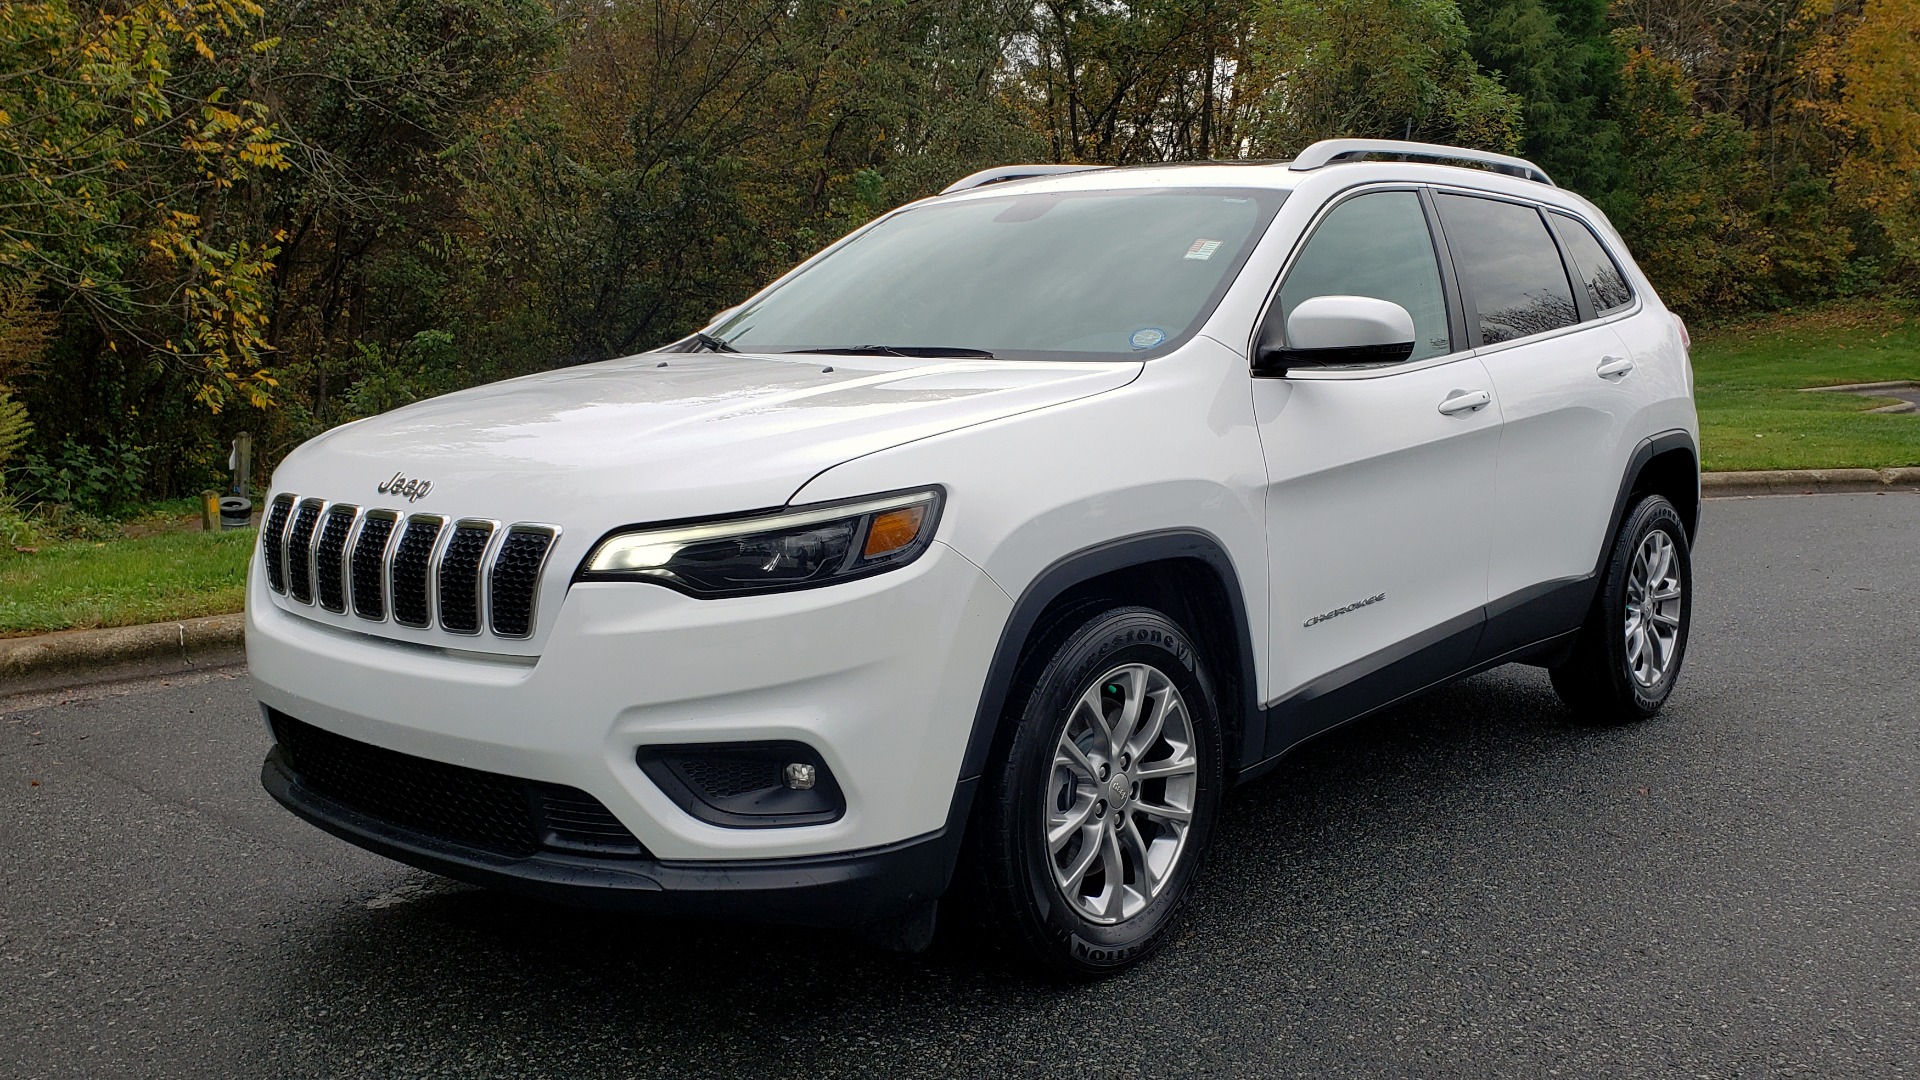 Used 2019 Jeep CHEROKEE LATITUDE PLUS FWD / CLD WTHR / HTD STS / BLIND SPOT / PRK ASST for sale Sold at Formula Imports in Charlotte NC 28227 1